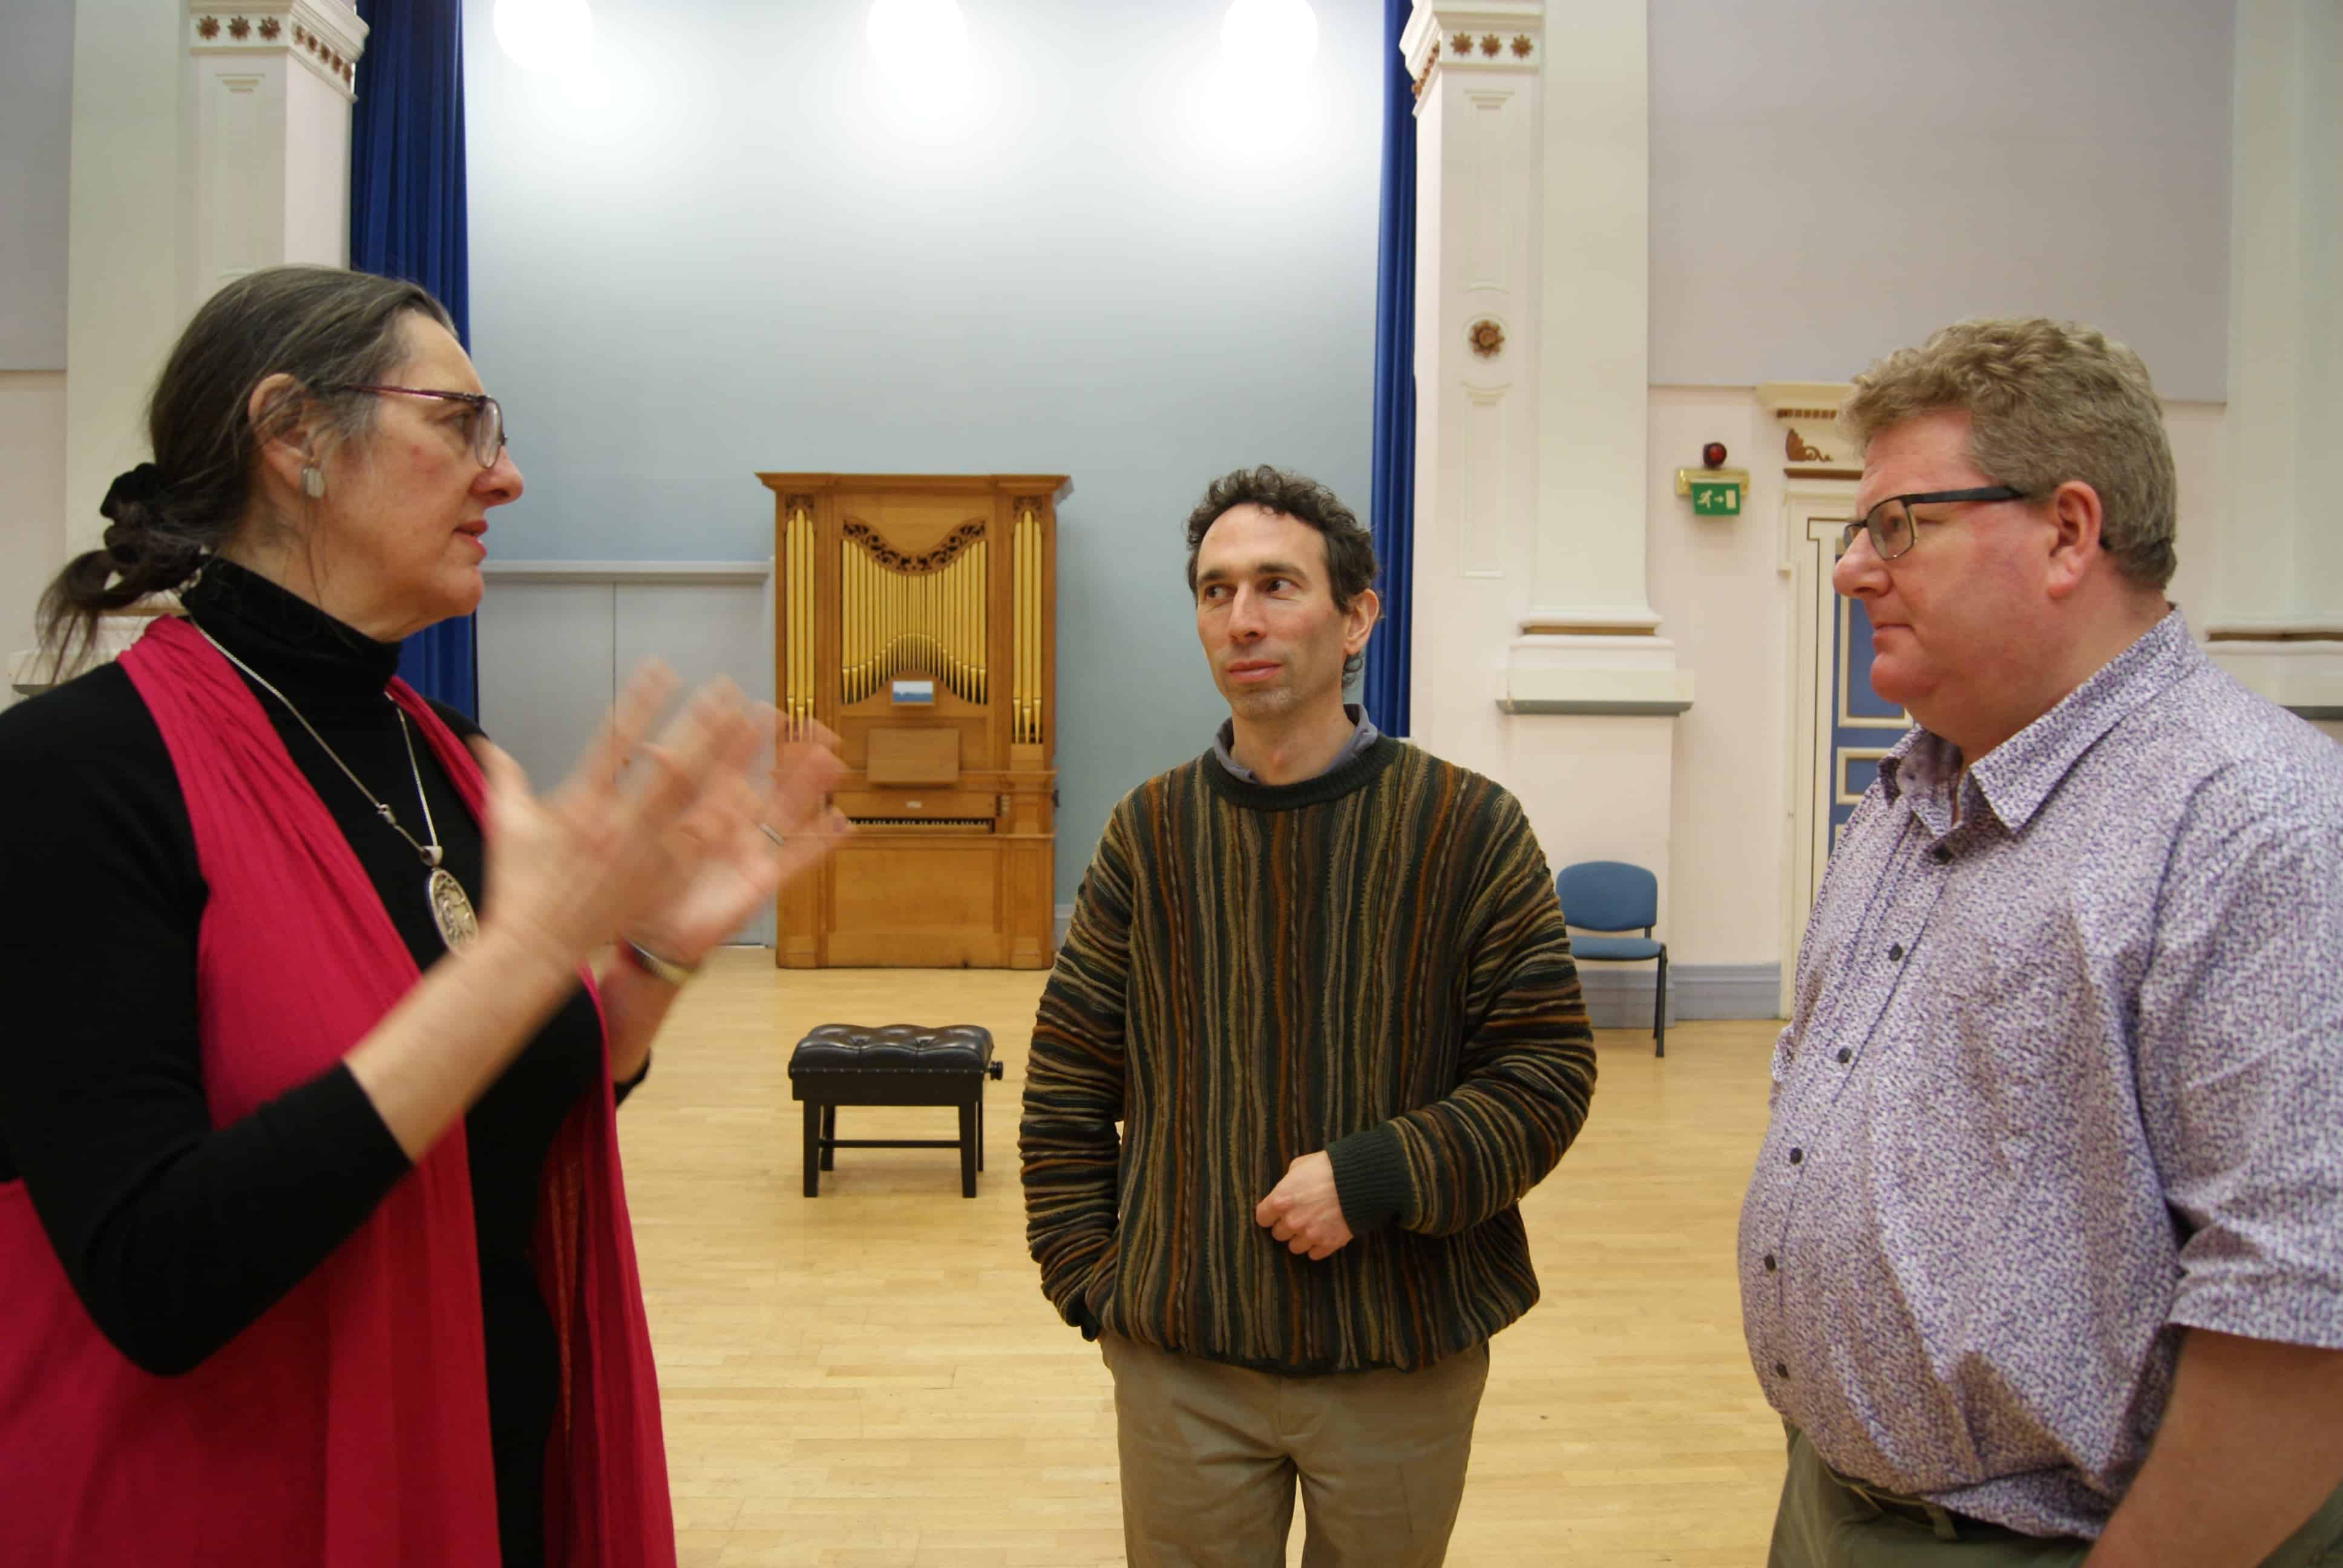 Conductor Bridget Budge, producer Simon Fox and Stephen Muir in conversation